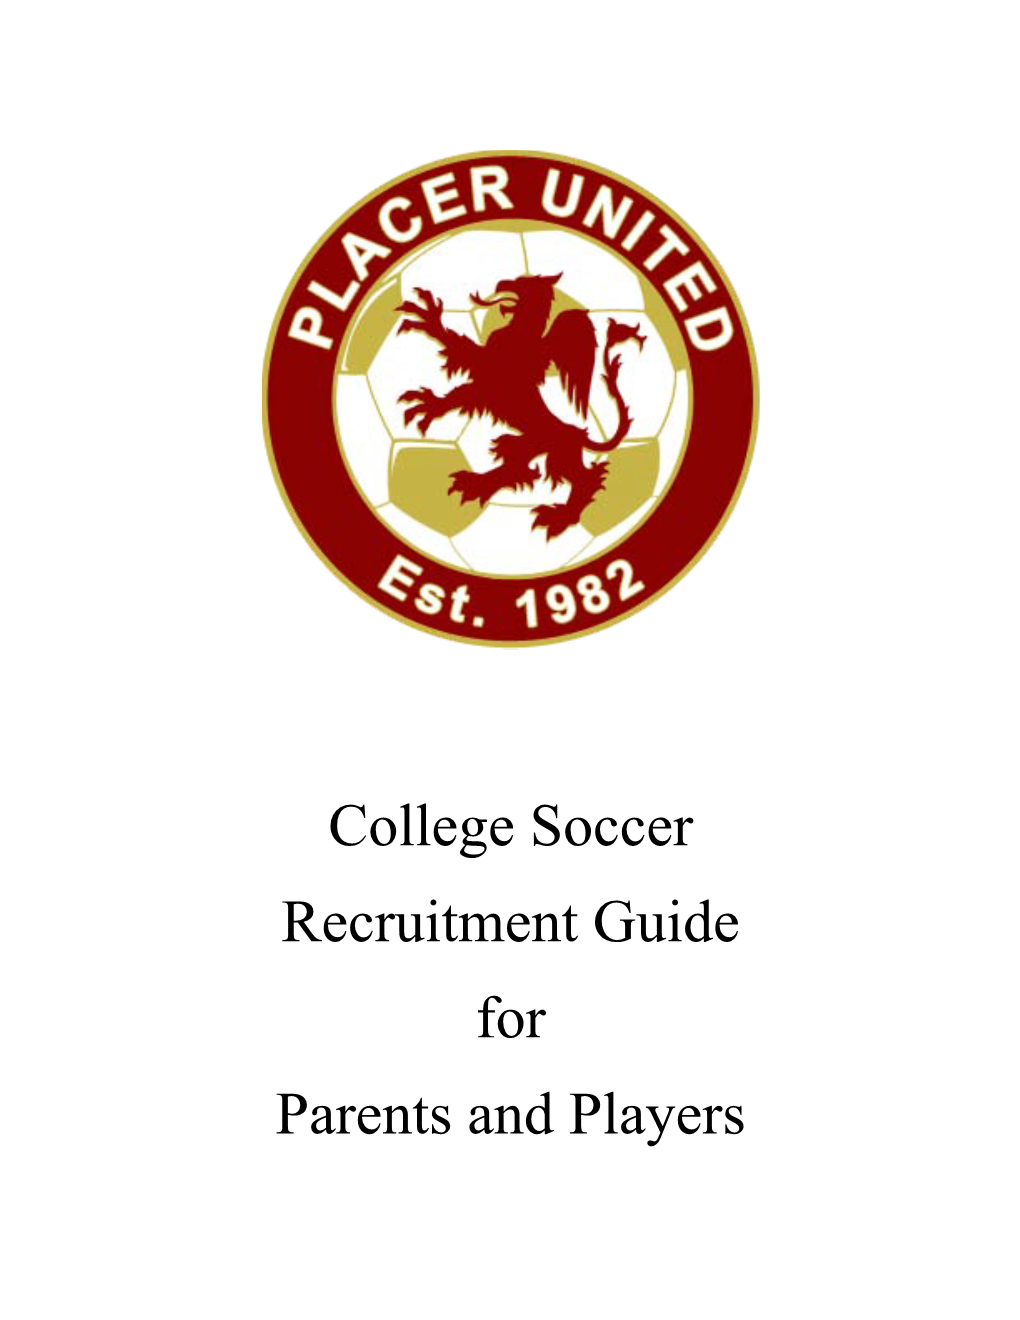 College Soccer Recruitment Guide for Parents and Players Table of Contents